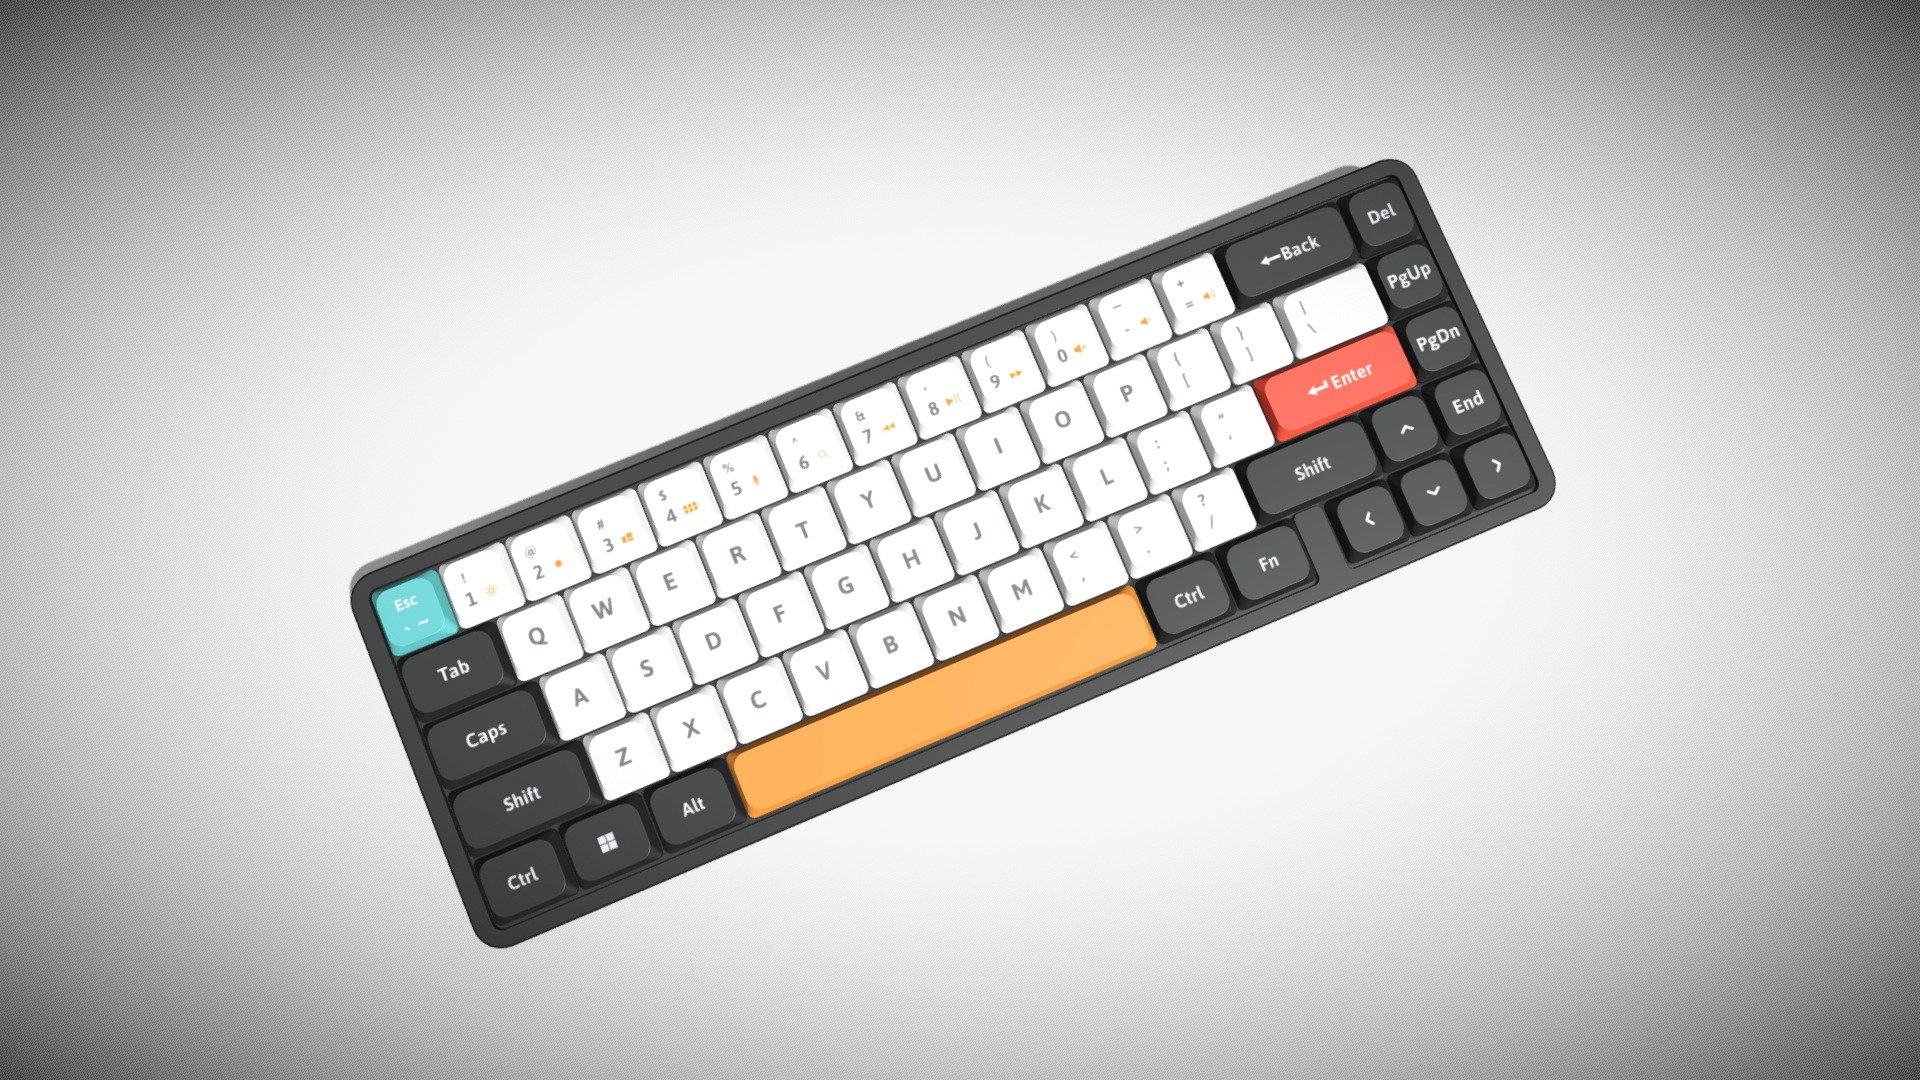 Detailed model of a black 65-Percent Layout Keyboard, modeled in Cinema 4D.The model was created using approximate real world dimensions.

The model has 41,588 polys and 41,714 vertices.

An additional file has been provided containing the original Cinema 4D project files with both standard and v-ray materials, textures and other 3d export files such as 3ds, fbx and obj 3d model